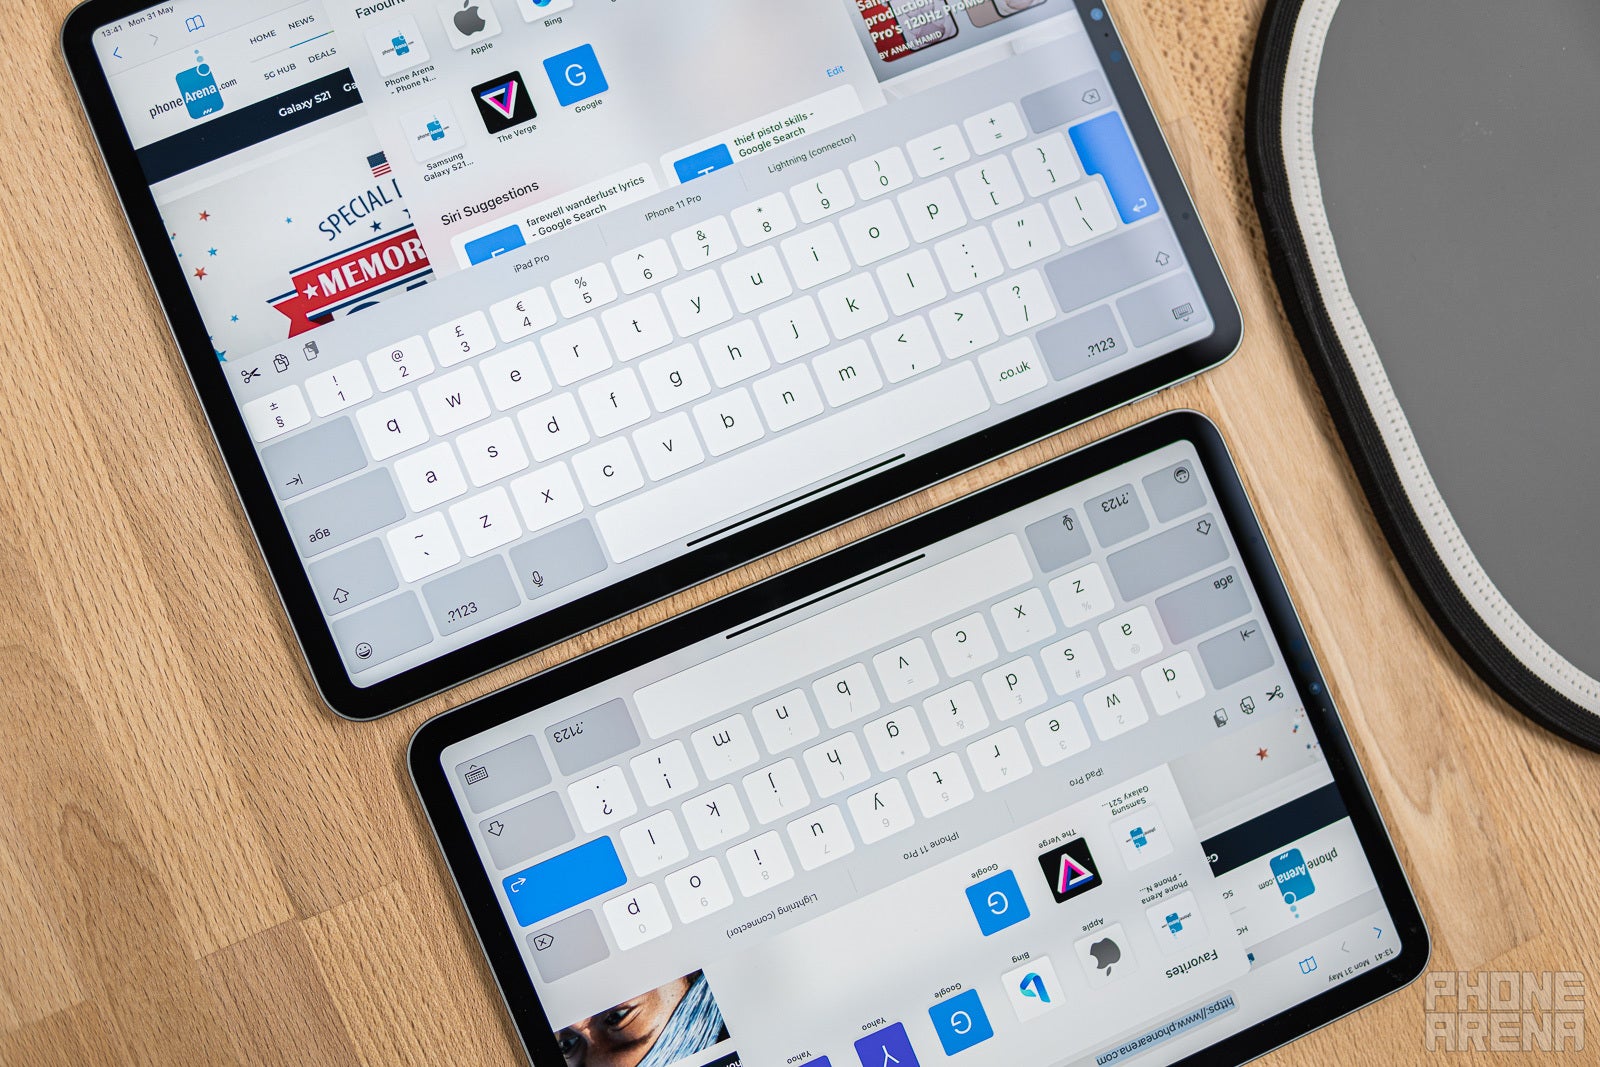 The iPad will never have macOS, that's why